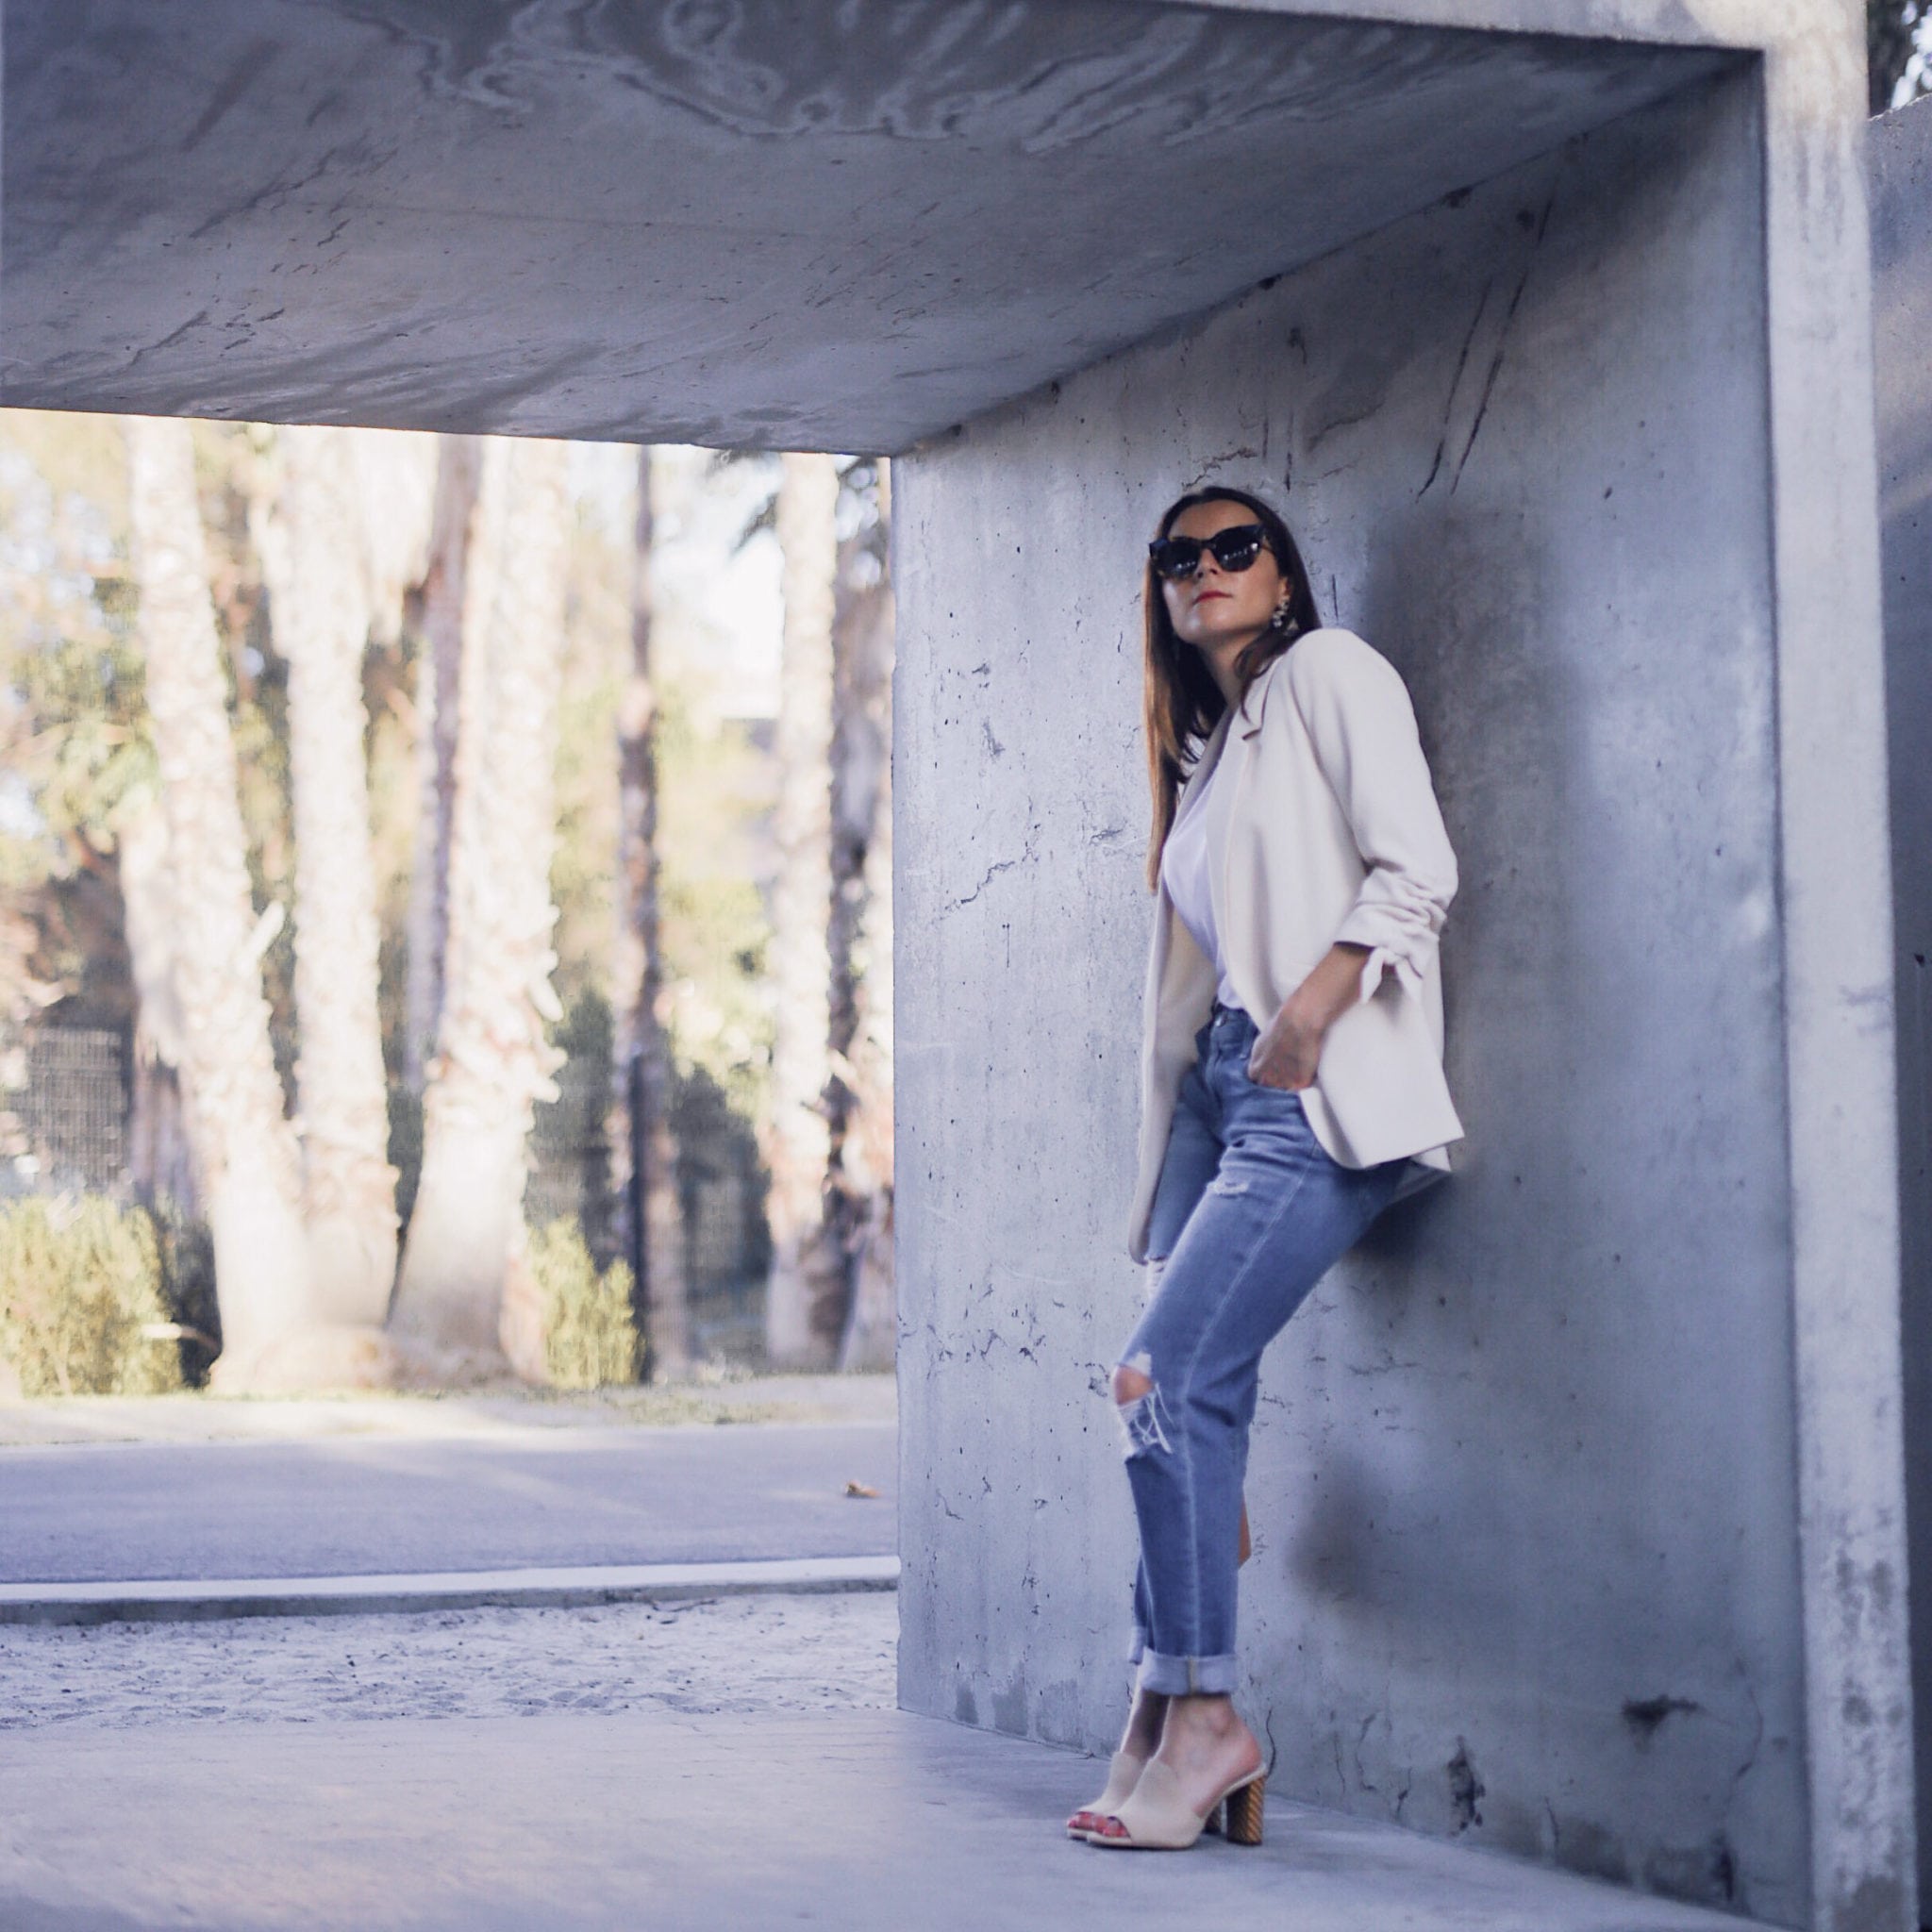 Style upgrade: The Summer blazer for women. Fashion Blogger Julia Comil is wearing a cream summer blazer from River Island. The full look and selection of affordable summer blazers on Houseofcomil.com